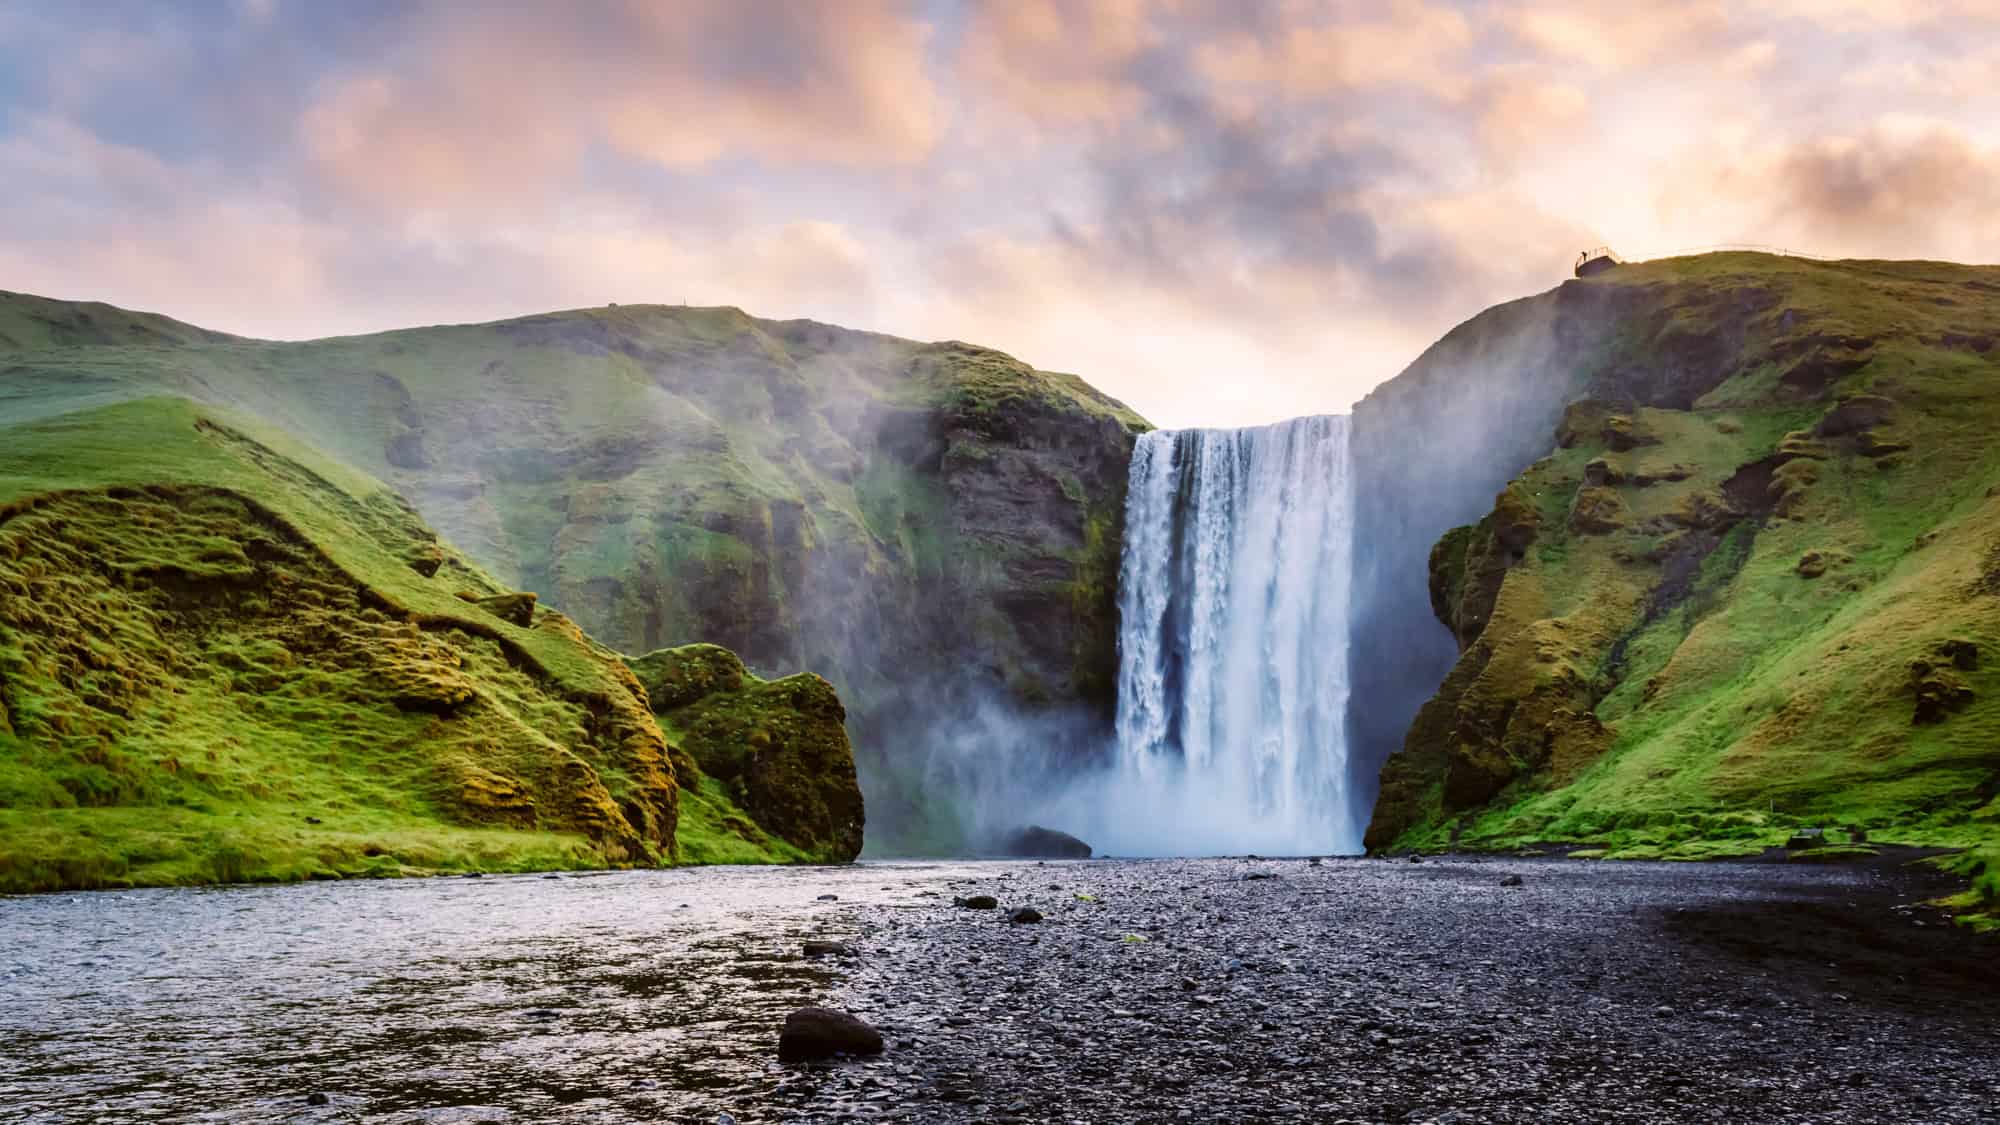 <p>And finally, we can’t forget about Skógafoss, one of Iceland’s legendary waterfalls. This bad boy drops a whopping 200 feet and stretches 80 feet wide—basically, it’s the Arnold Schwarzenegger of waterfalls. </p> <p>The sheer force will blow your mind, and if you’re feeling extra lucky (or just happen to catch the right light), <strong>you might even spot a double rainbow</strong>. Yup, that’s right—two rainbows for the price of one (we know what you’re thinking, and we thought it too). <em>It’s the best kind of BOGO deal. </em></p> <div class="wp-block-kadence-iconlist kt-svg-icon-list-items kt-svg-icon-list-items4232_b6d6b5-24 kt-svg-icon-list-columns-1 alignnone"> <ul class="kt-svg-icon-list"> <li class="wp-block-kadence-listitem kt-svg-icon-list-item-wrap kt-svg-icon-list-item-4232_3e625a-6d"><span><strong>Best time to visit</strong>: Early morning or late afternoon to catch the rainbows.</span></li> </ul> </div>  <div class="wp-block-kadence-iconlist kt-svg-icon-list-items kt-svg-icon-list-items4232_027a7c-85 kt-svg-icon-list-columns-1 alignnone"> <ul class="kt-svg-icon-list"> <li class="wp-block-kadence-listitem kt-svg-icon-list-item-wrap kt-svg-icon-list-item-4232_f77347-4a"><span><strong>Discover More:</strong> <em>Sure, Iceland’s Northern Lights are cool and all, but did you know there are other places with equally dazzling celestial shows? <a href="https://discoverparksandwildlife.com/missed-the-northern-lights-last-week-here-are-6-national-parks-where-you-have-a-chance-to-spot-them/">Check out our list of national parks where you have a good chance of spotting them on your visit</a>. </em></span></li> </ul> </div>